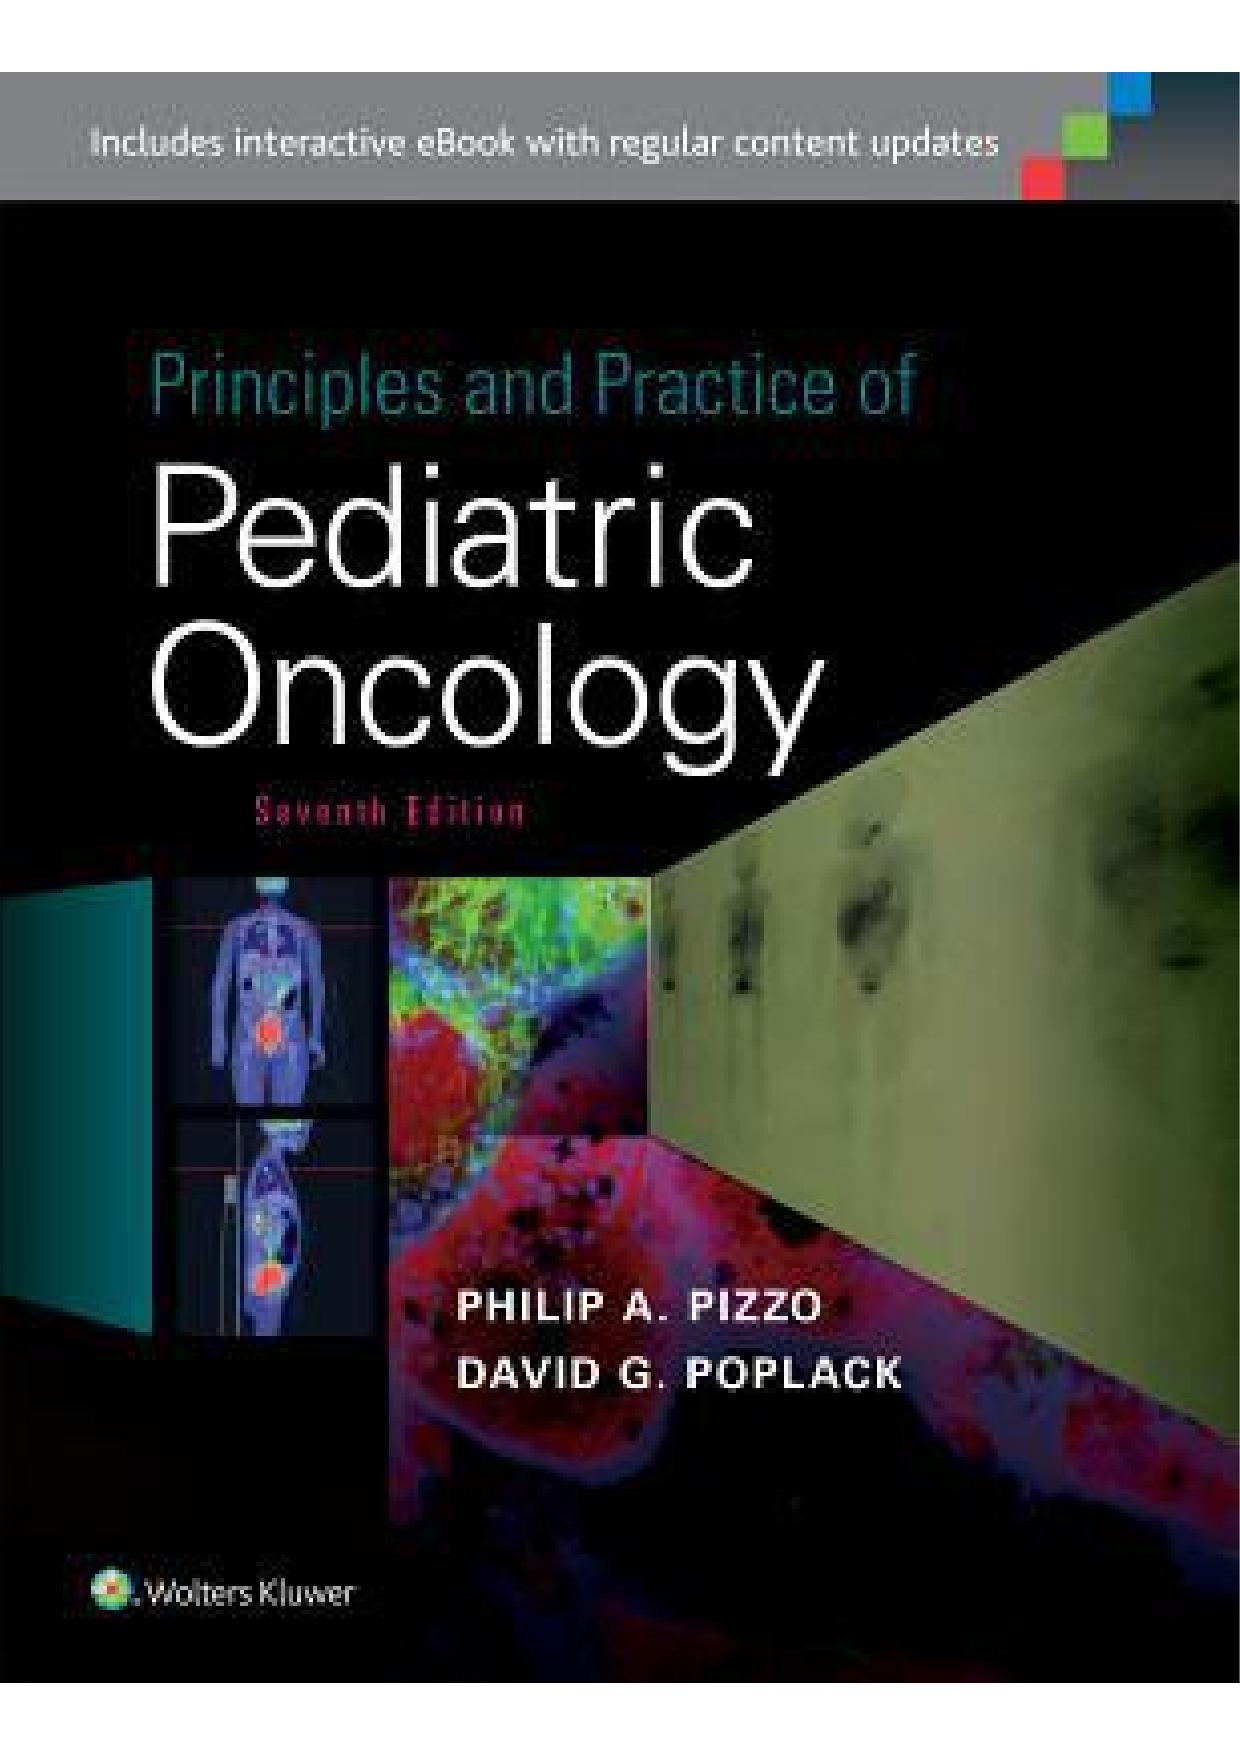 Principles and Practice of Pediatric Oncology 7th.jpg